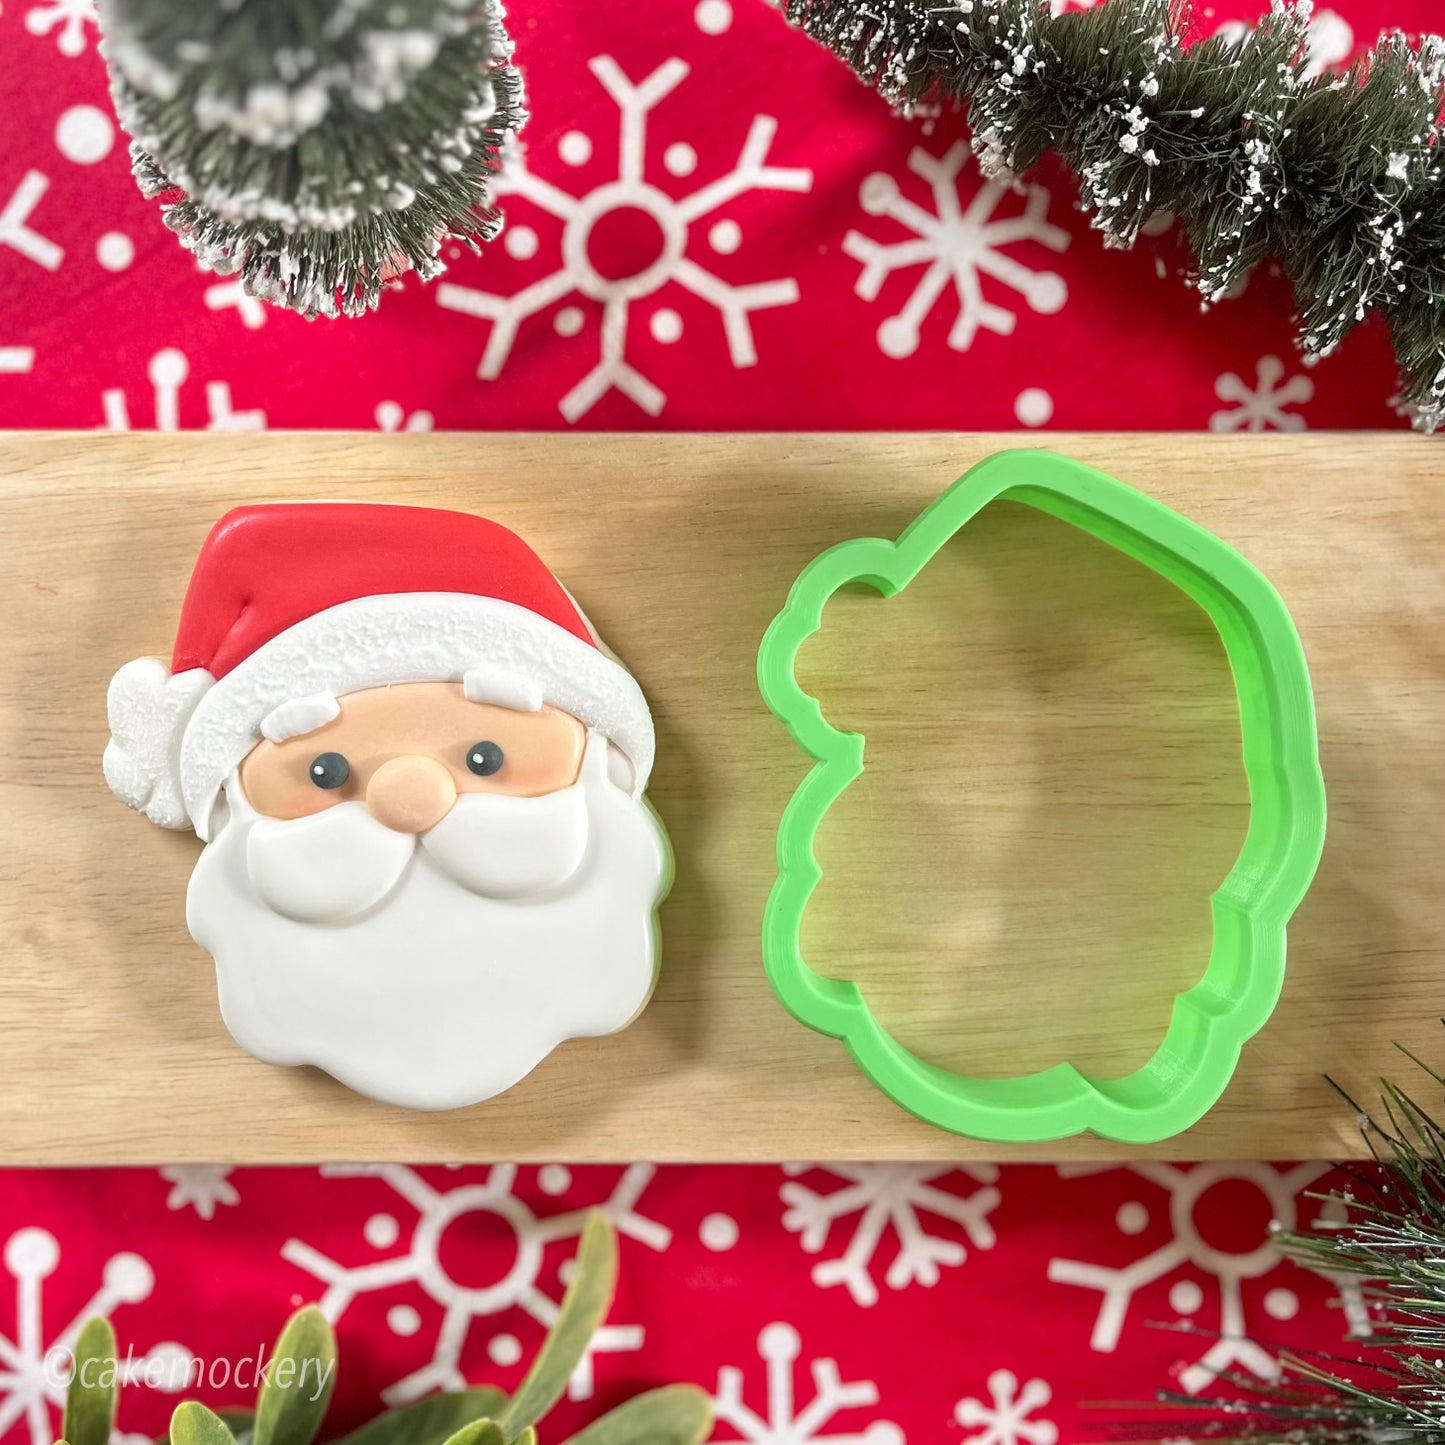 2023 Claus Couple Cookie Cutter Set of 2